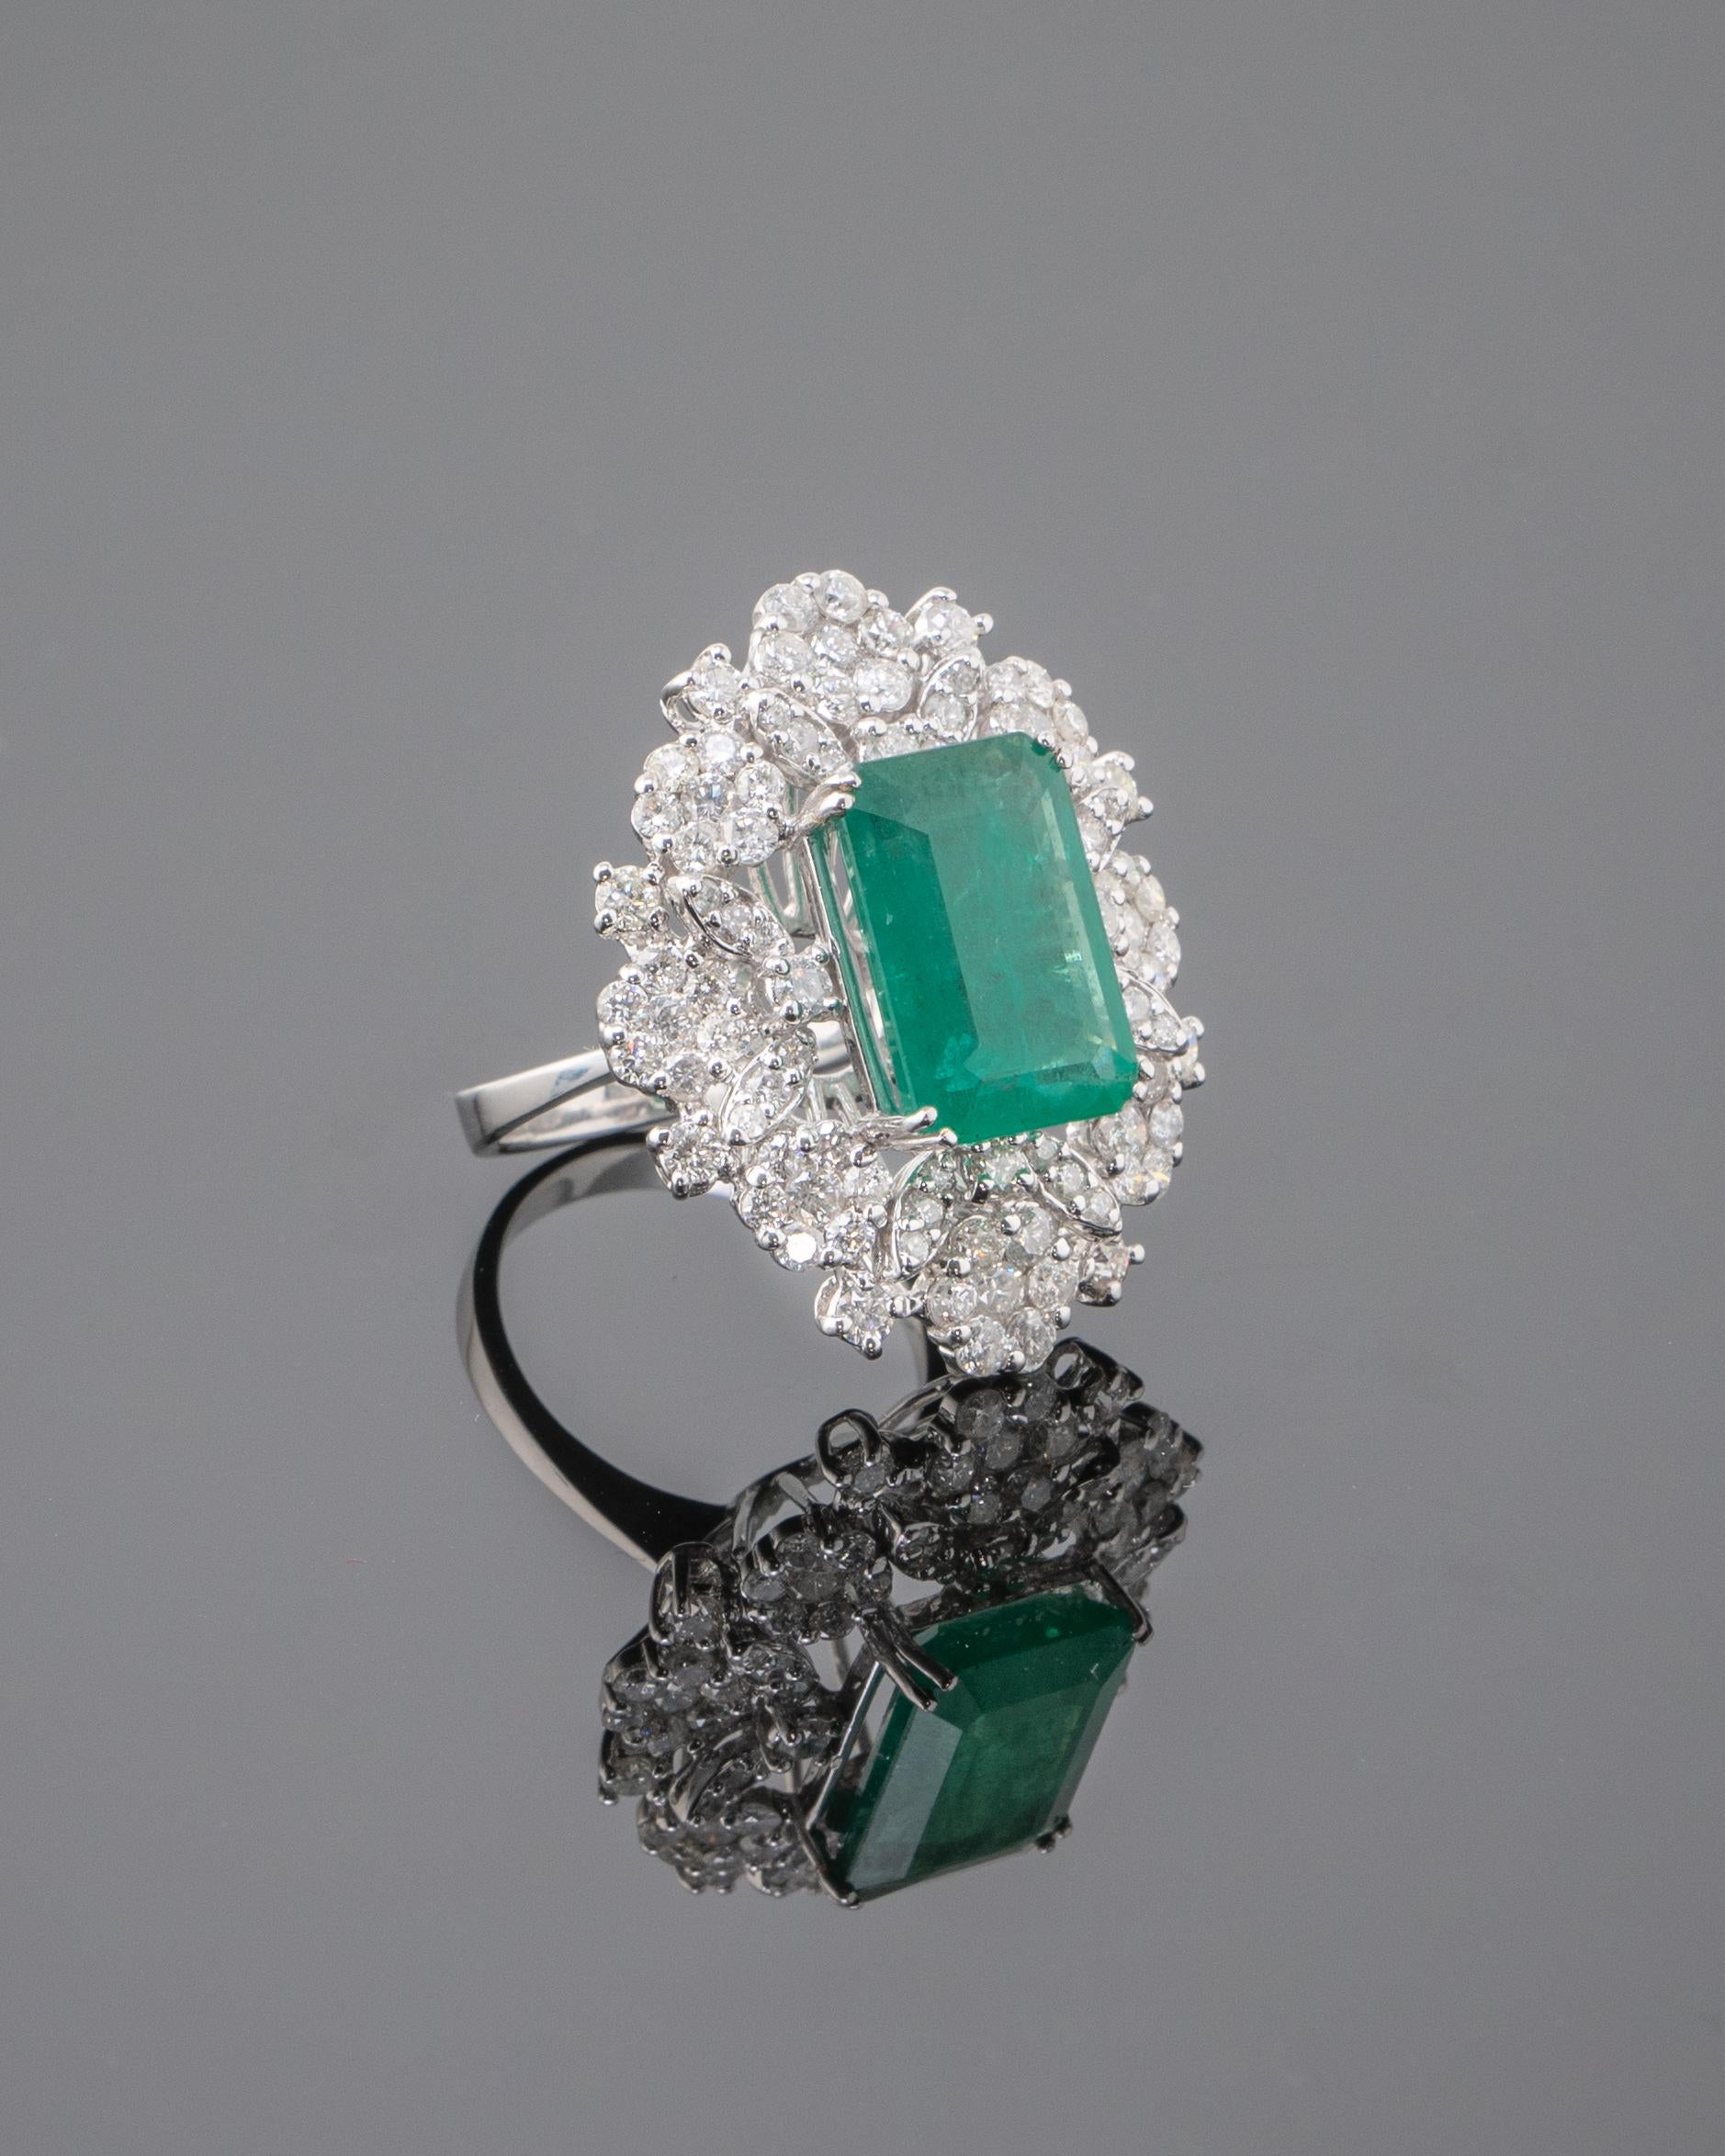 A beautiful 8.7 carat Zambian Emerald and 2.17 carat Diamond clutter - cocktail ring set in solid 18K White Gold. Ring is currently sized at US 6, can be resized.
Please feel free to message us if you have any queries. 
Free shipping provided.